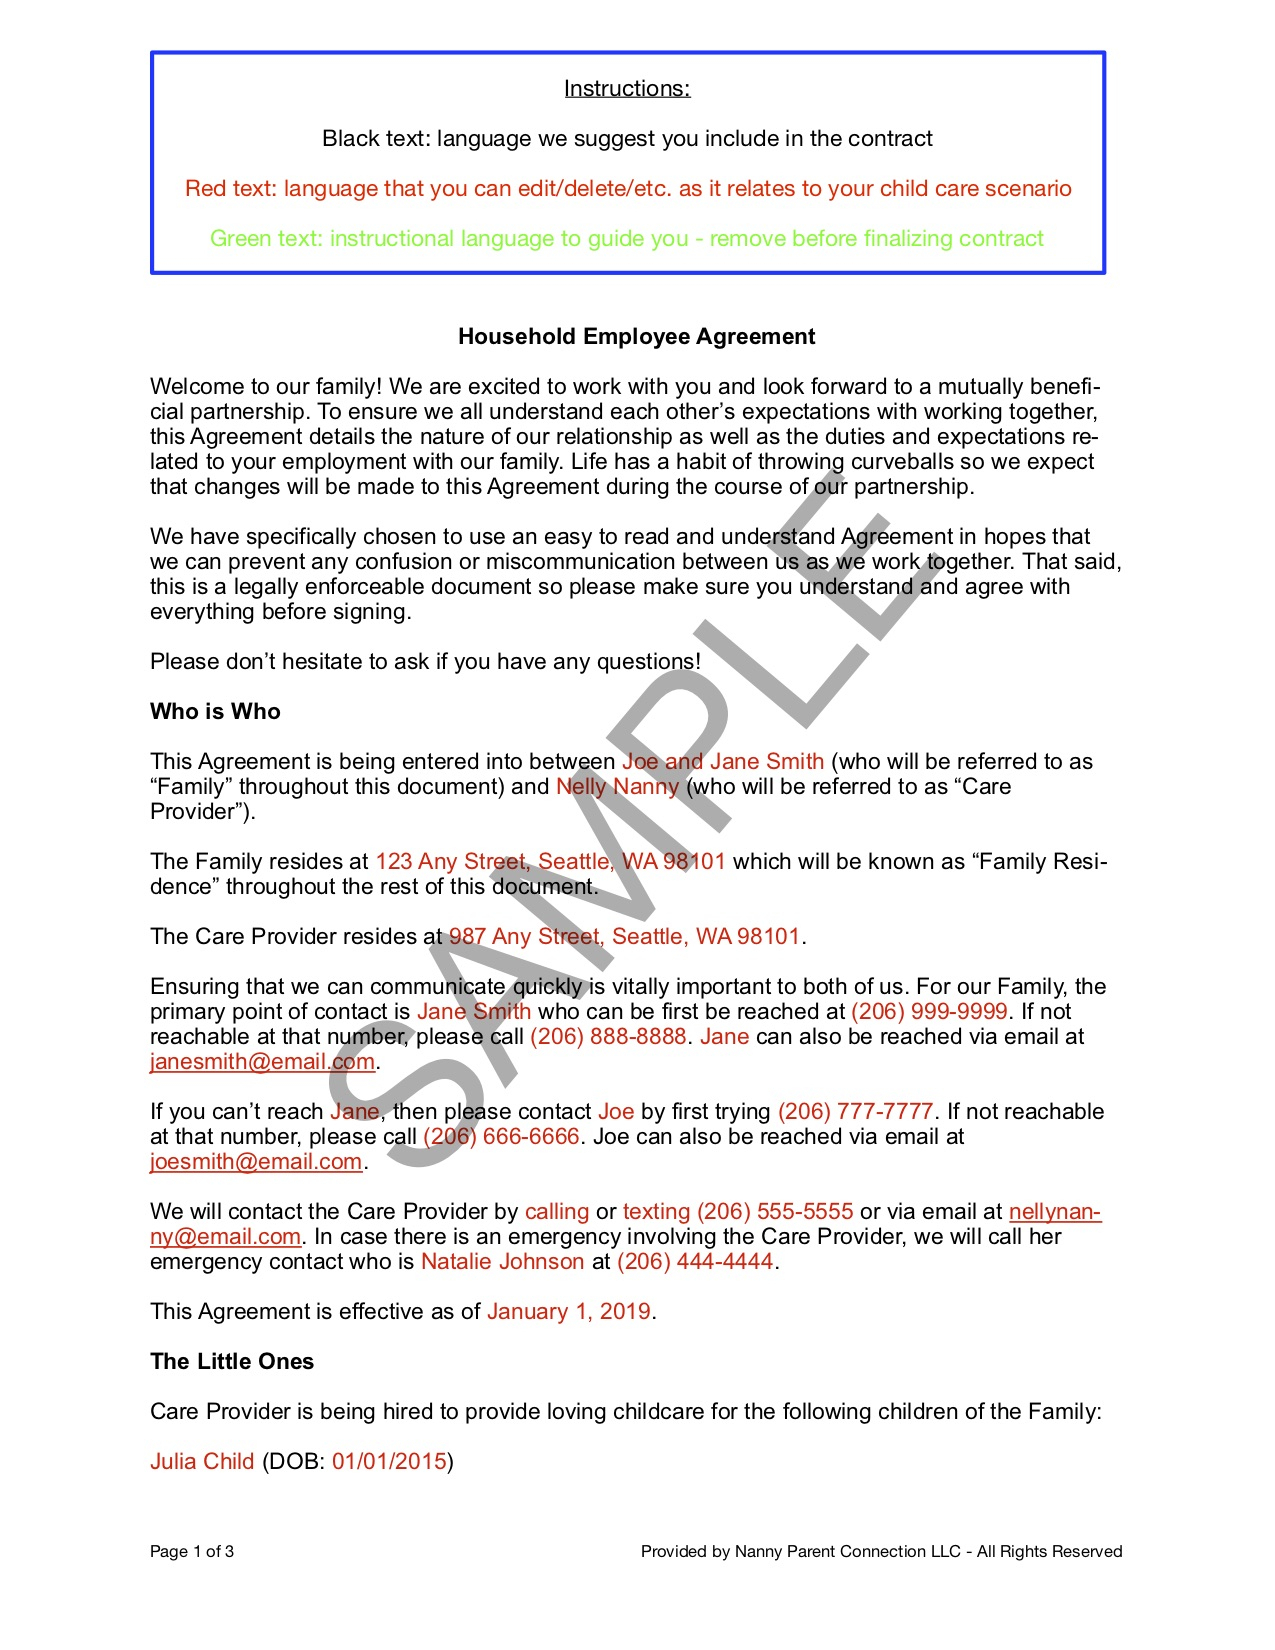 Household Employee Agreement | Nanny Parent Connection With Nanny Contract Template Word